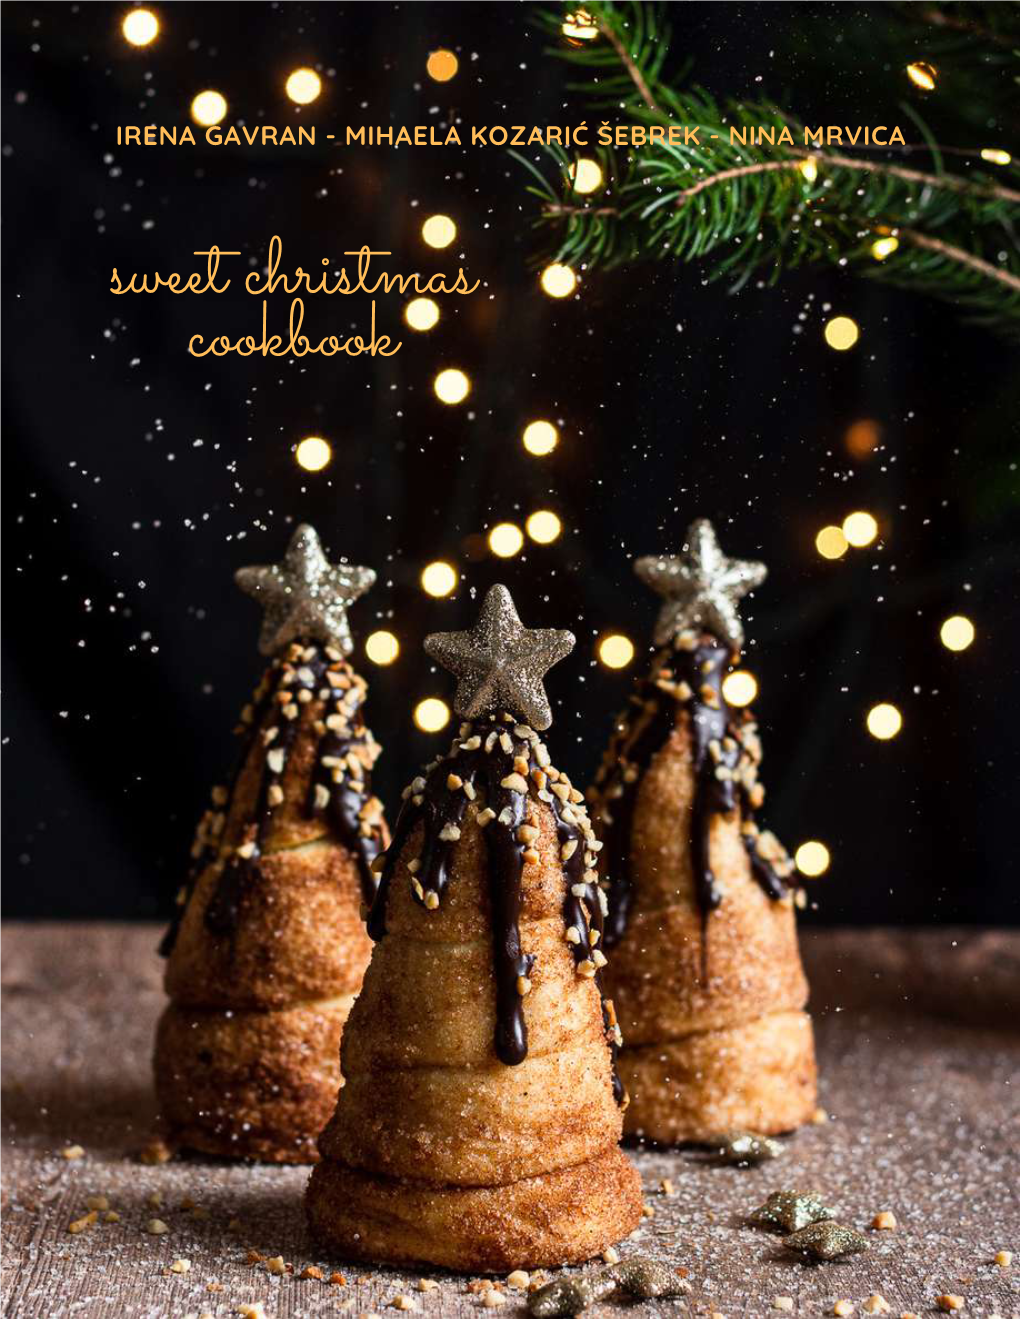 Sweet Christmas Cookbook INTRODUCTION